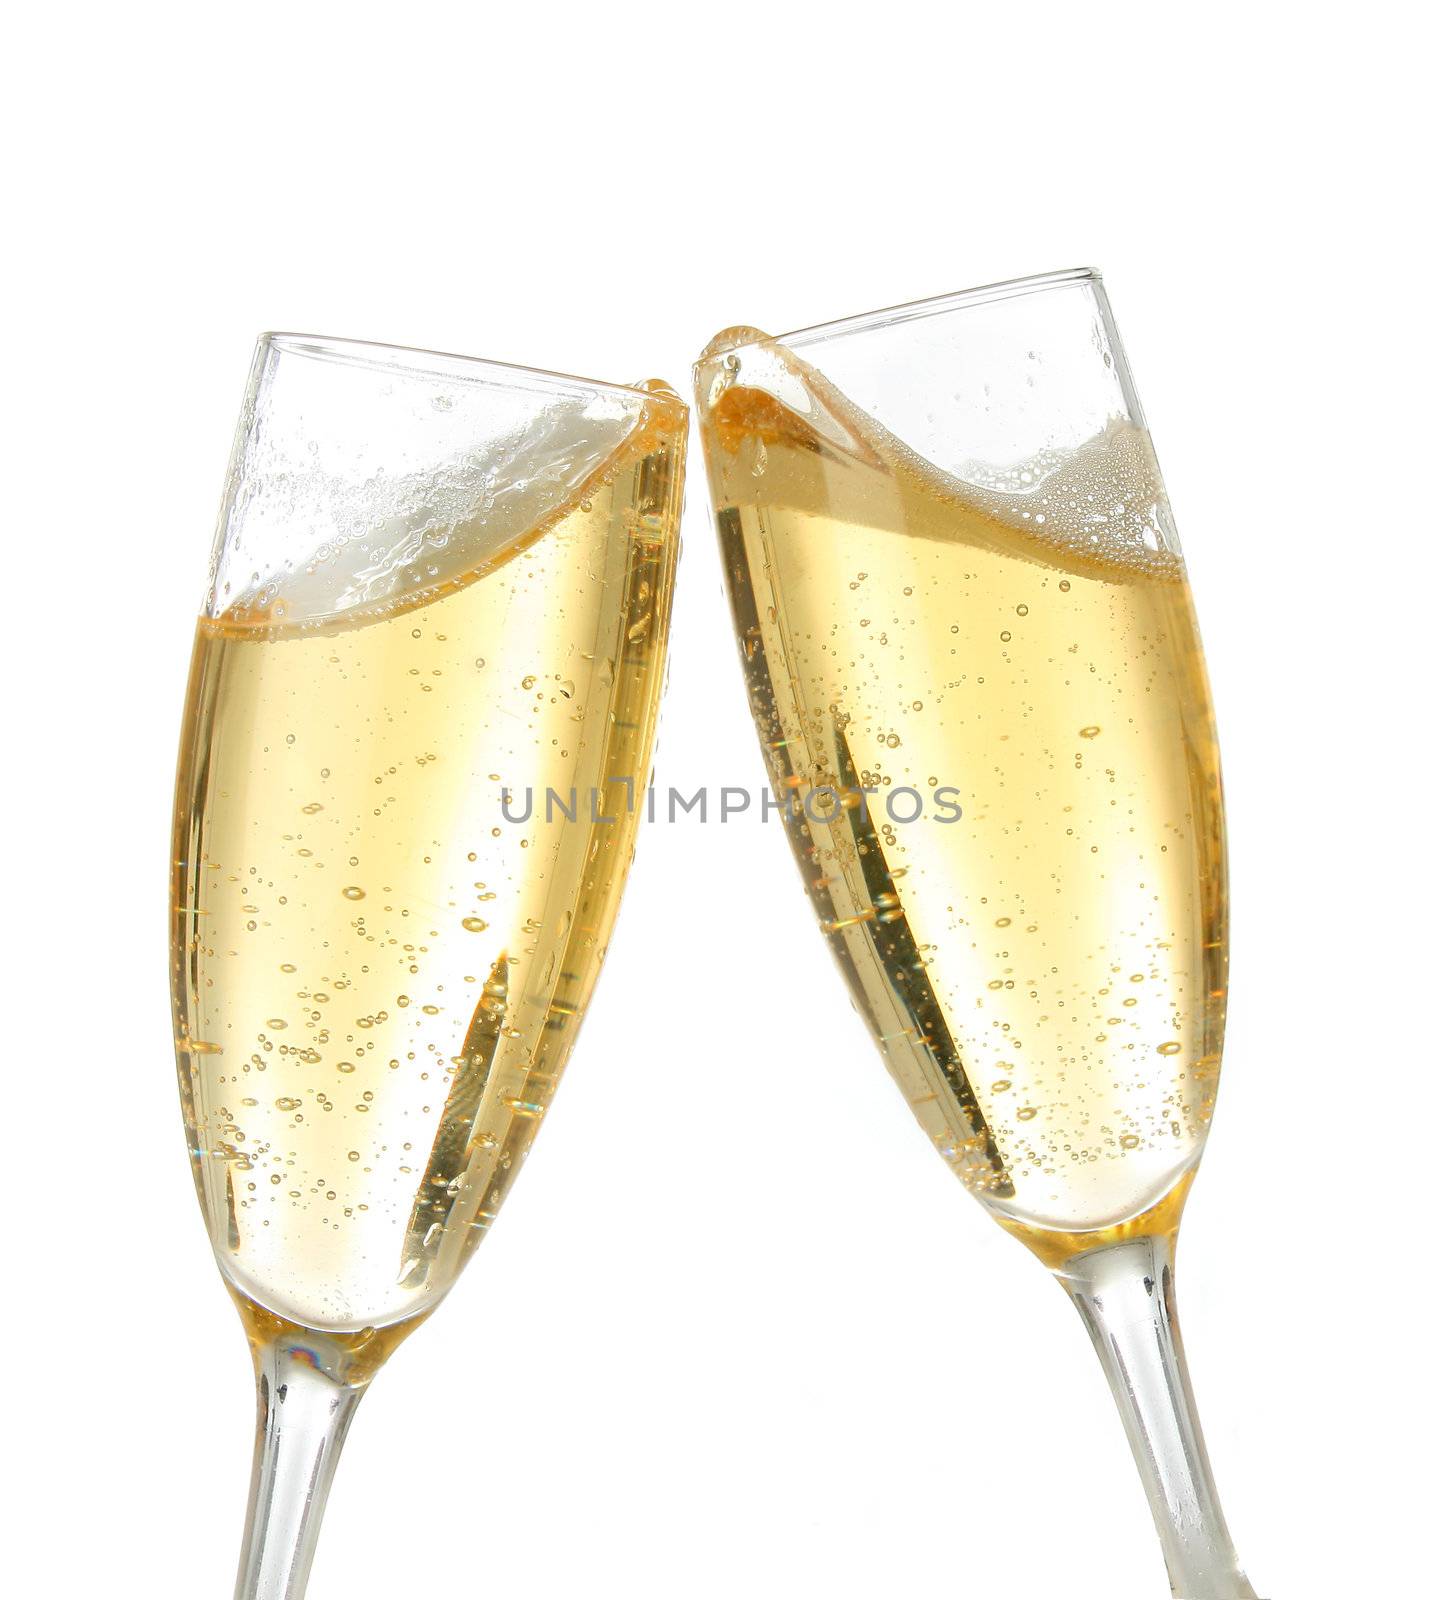 Pair of champagne flutes making a toast. Champagne splash